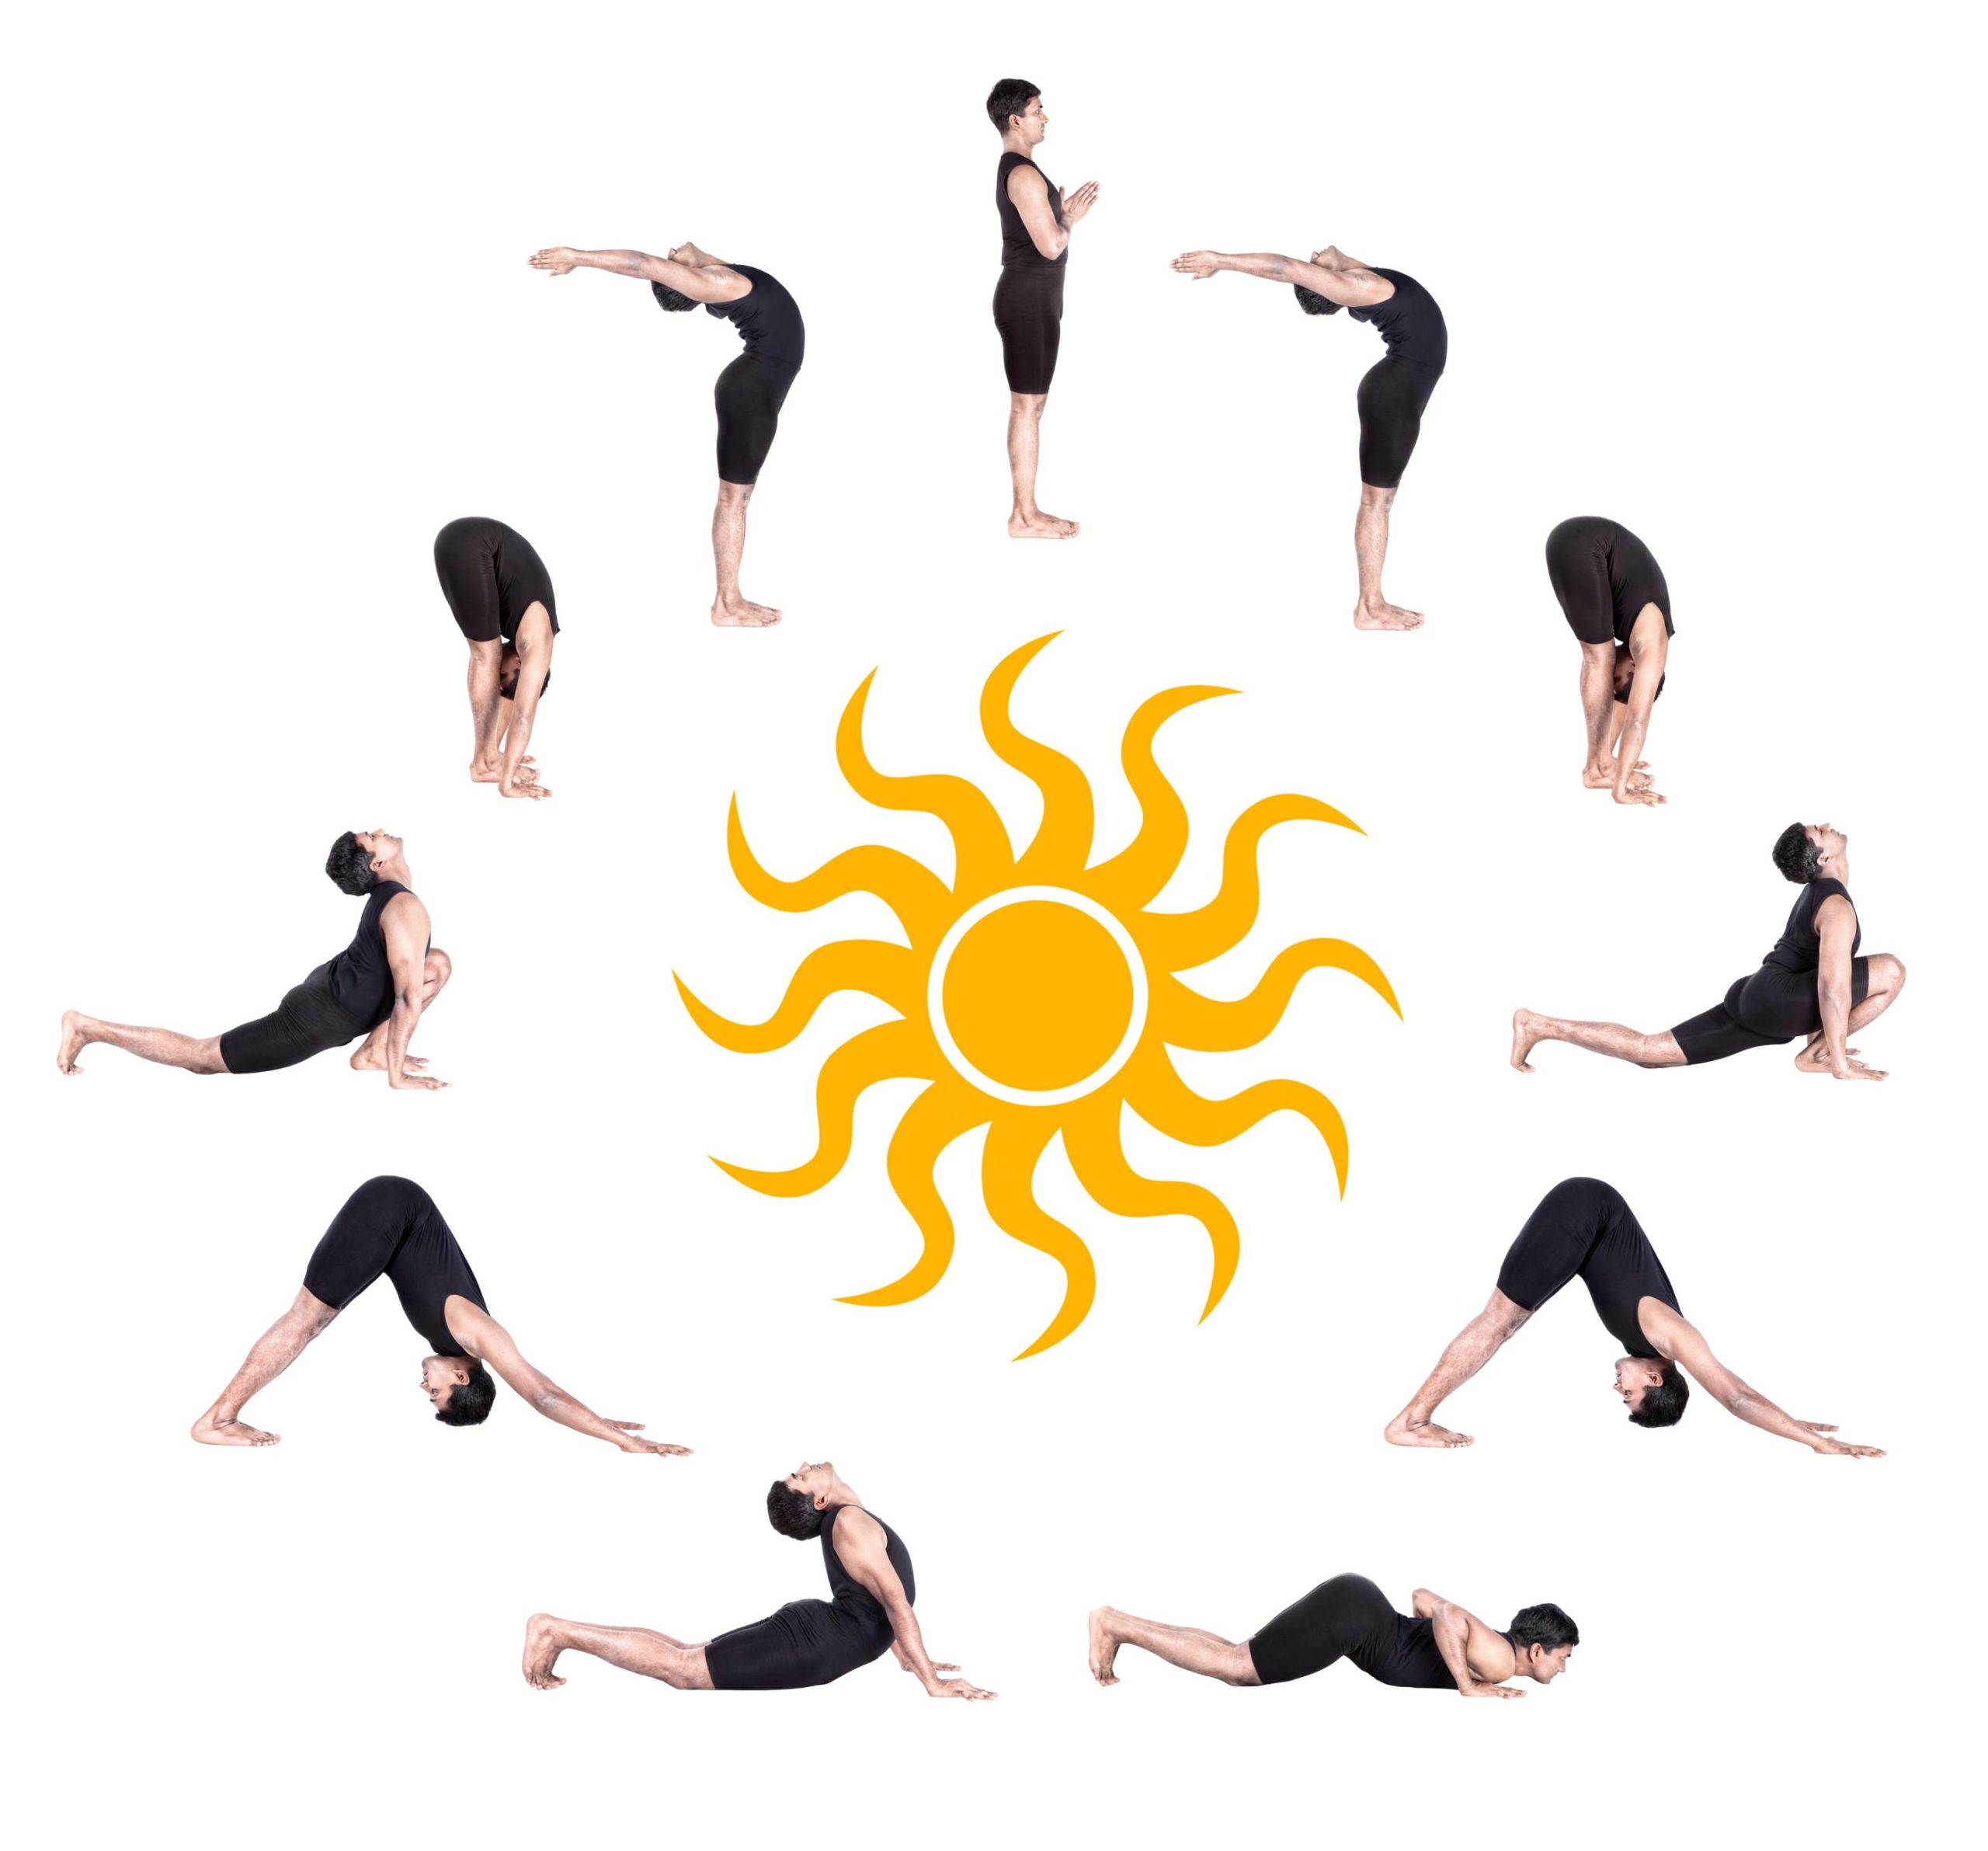 What are the 10 steps and 14 steps of Suryanamaskar (yoga)? - Quora